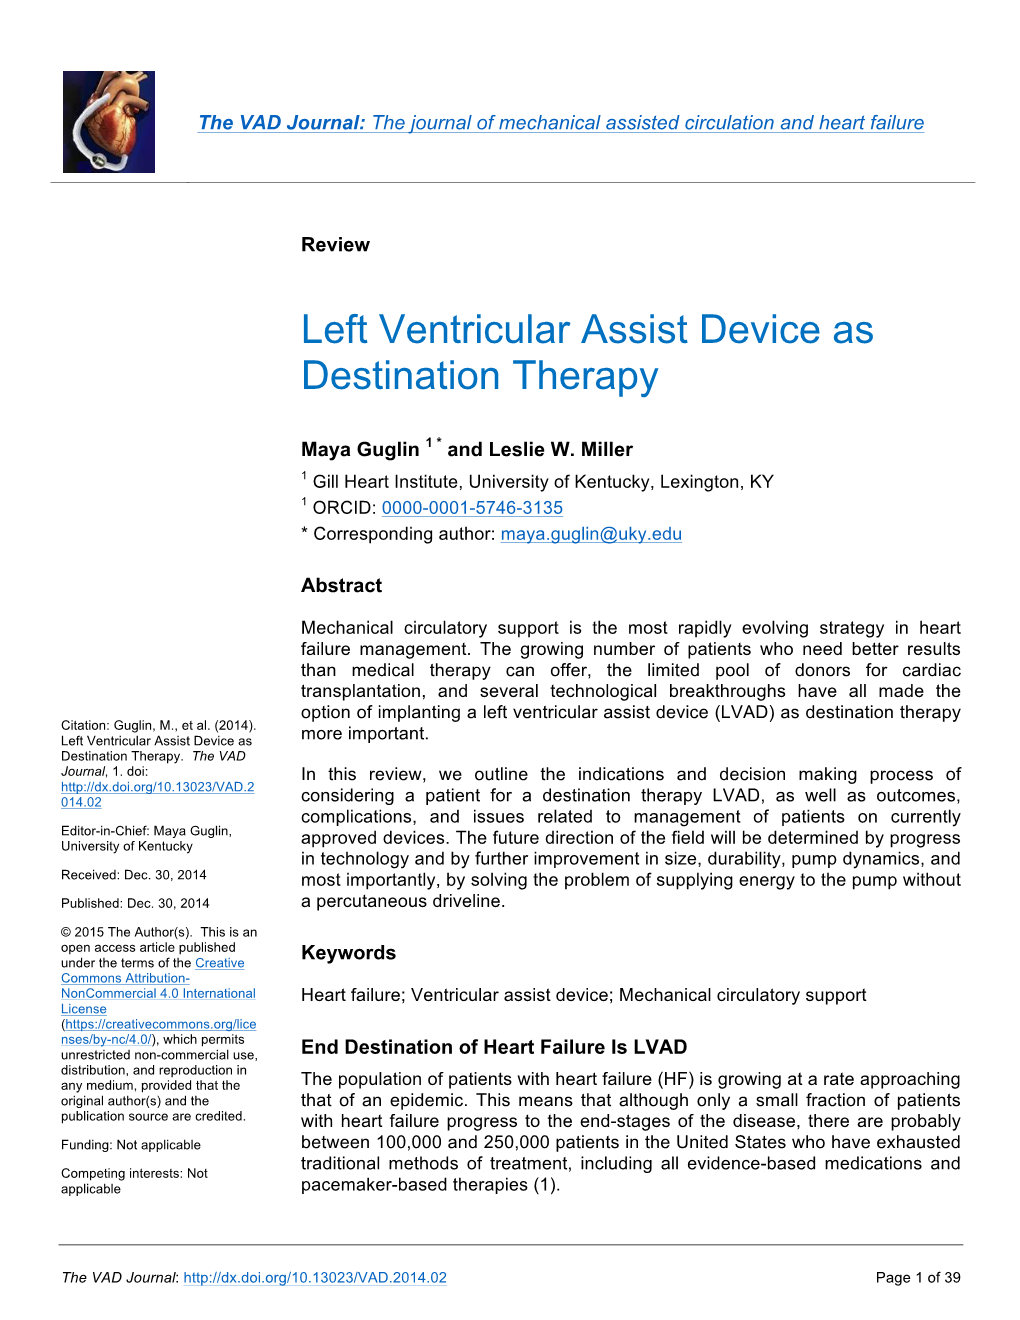 Left Ventricular Assist Device As Destination Therapy